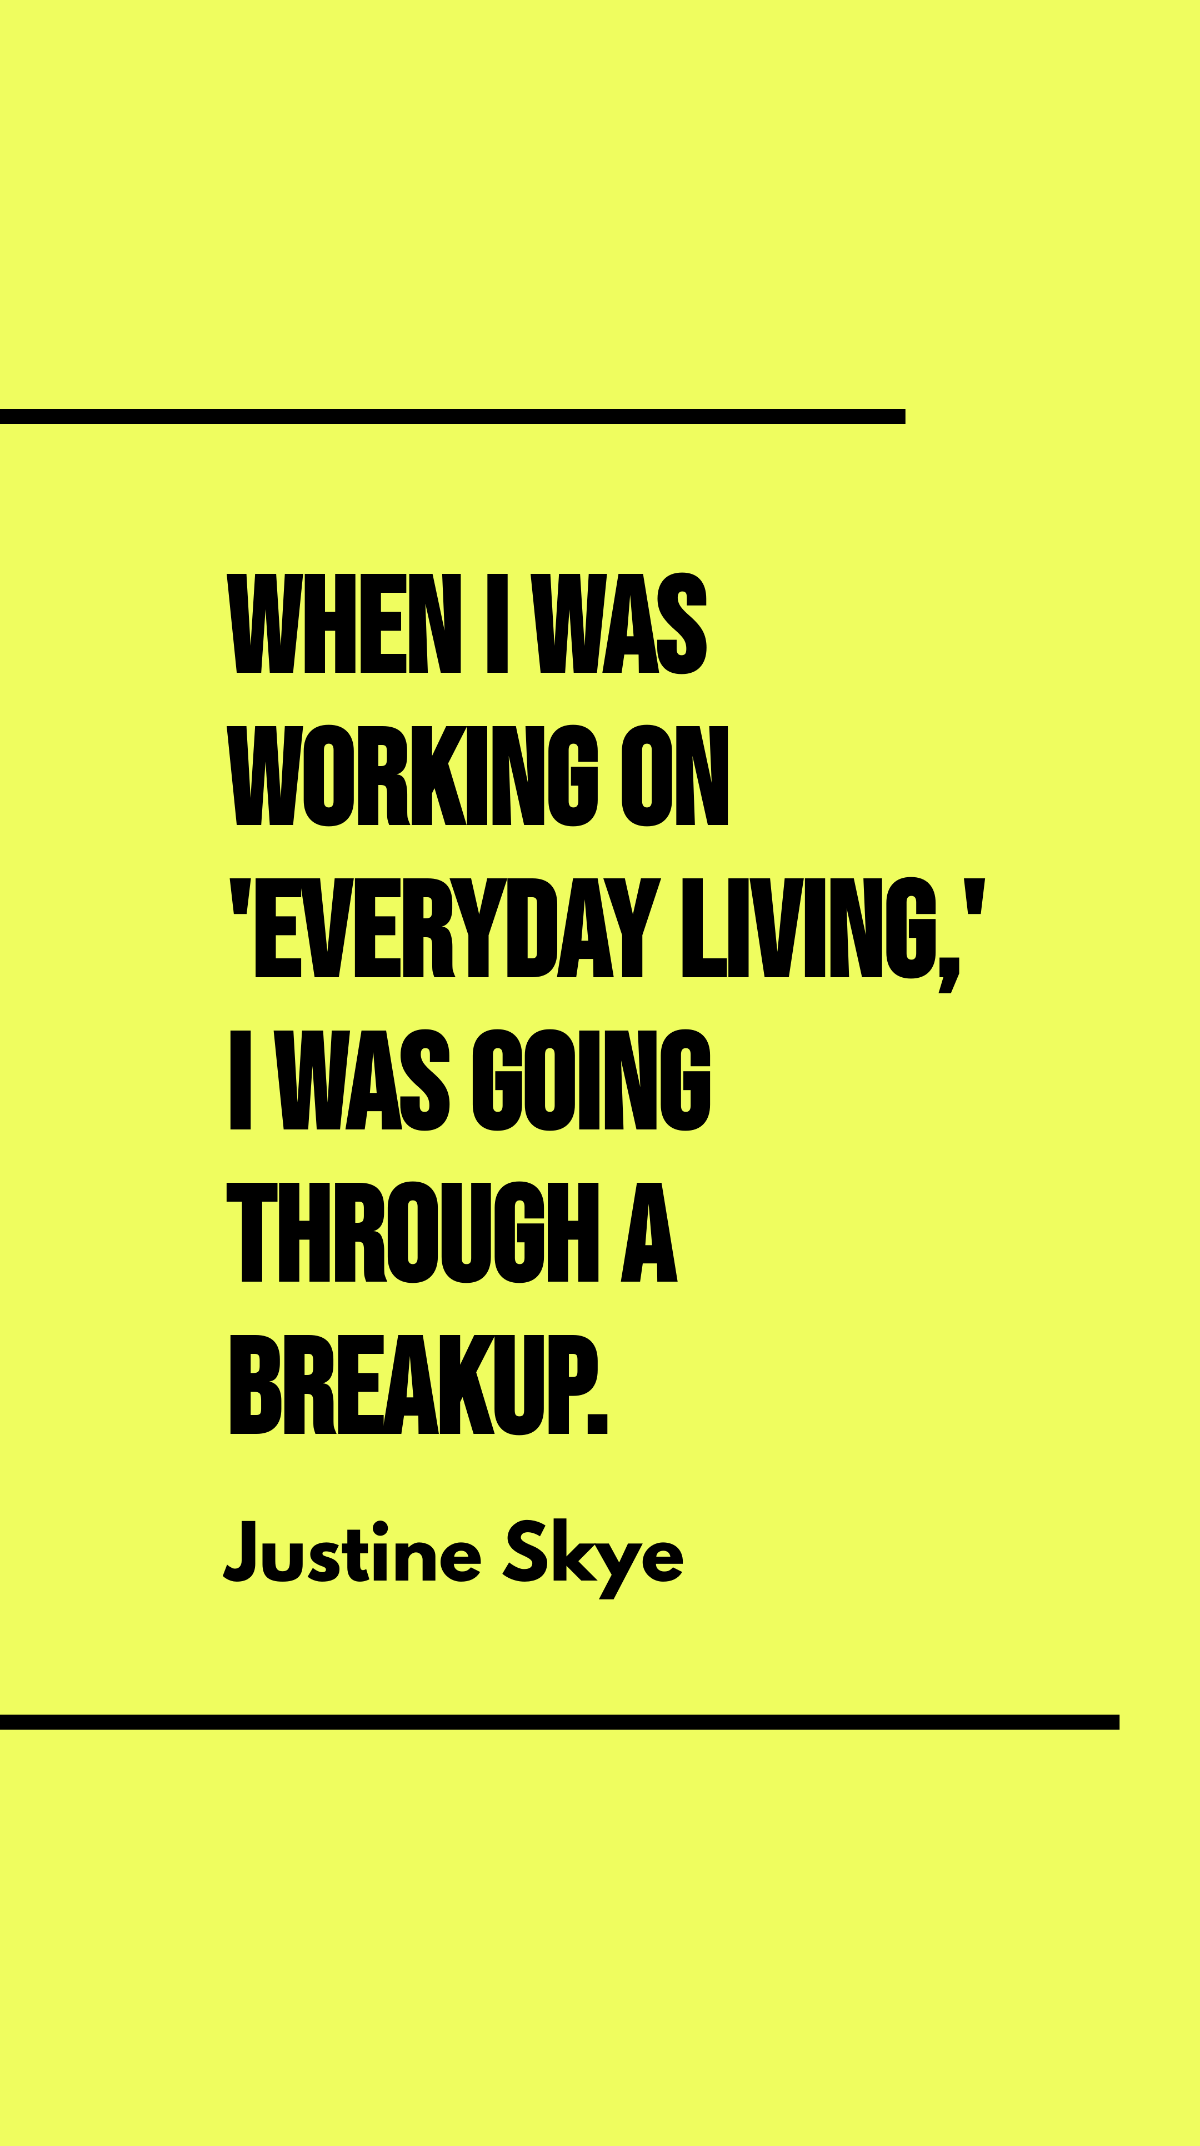 Justine Skye - When I was working on 'Everyday Living,' I was going through a breakup.